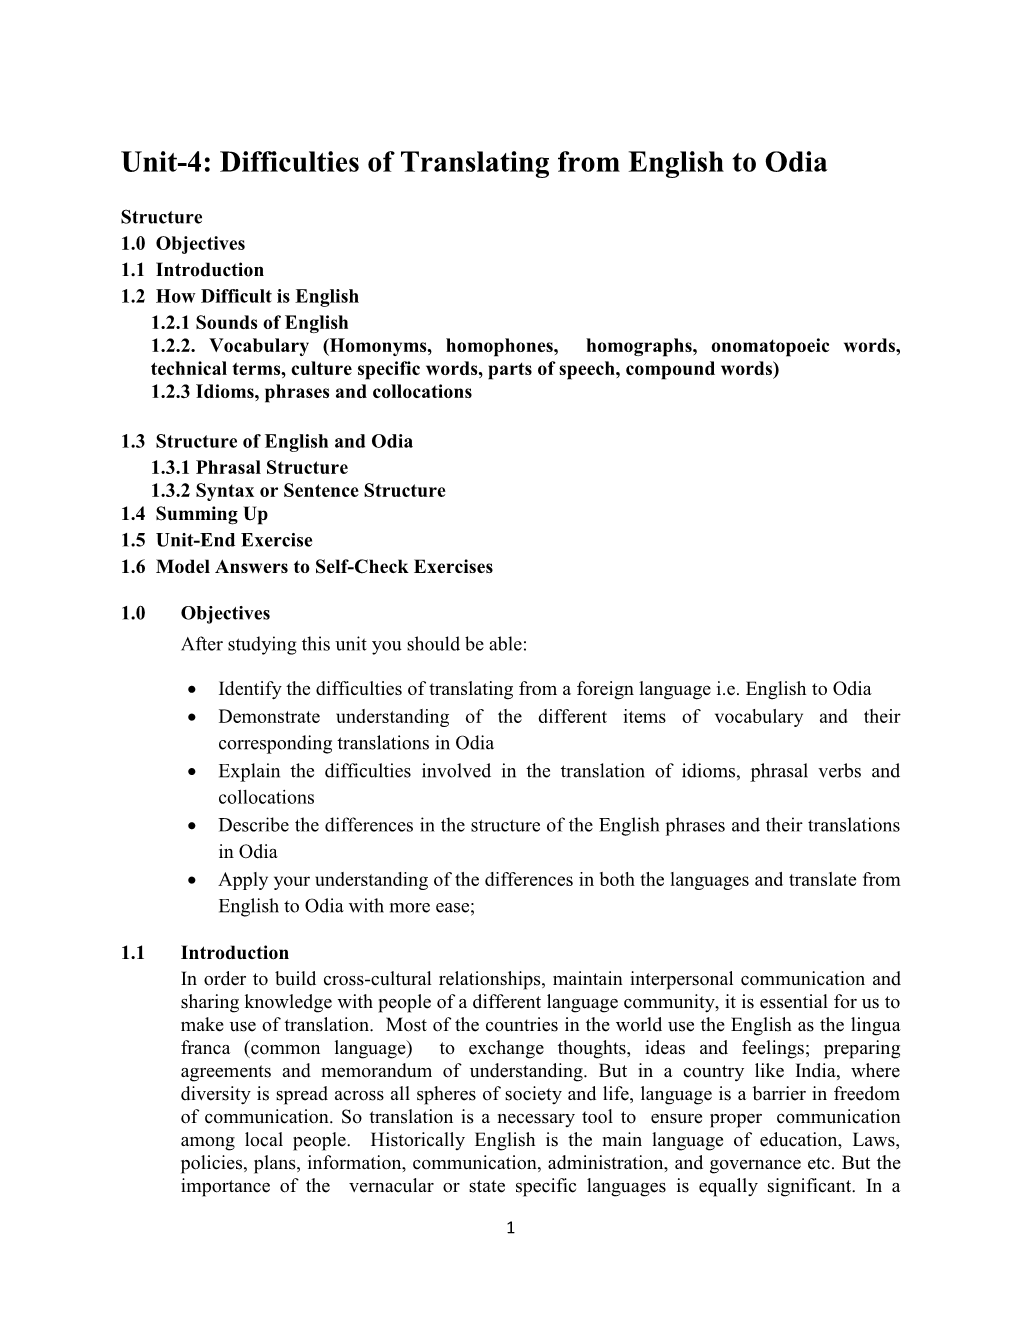 Unit-4: Difficulties of Translating from English to Odia